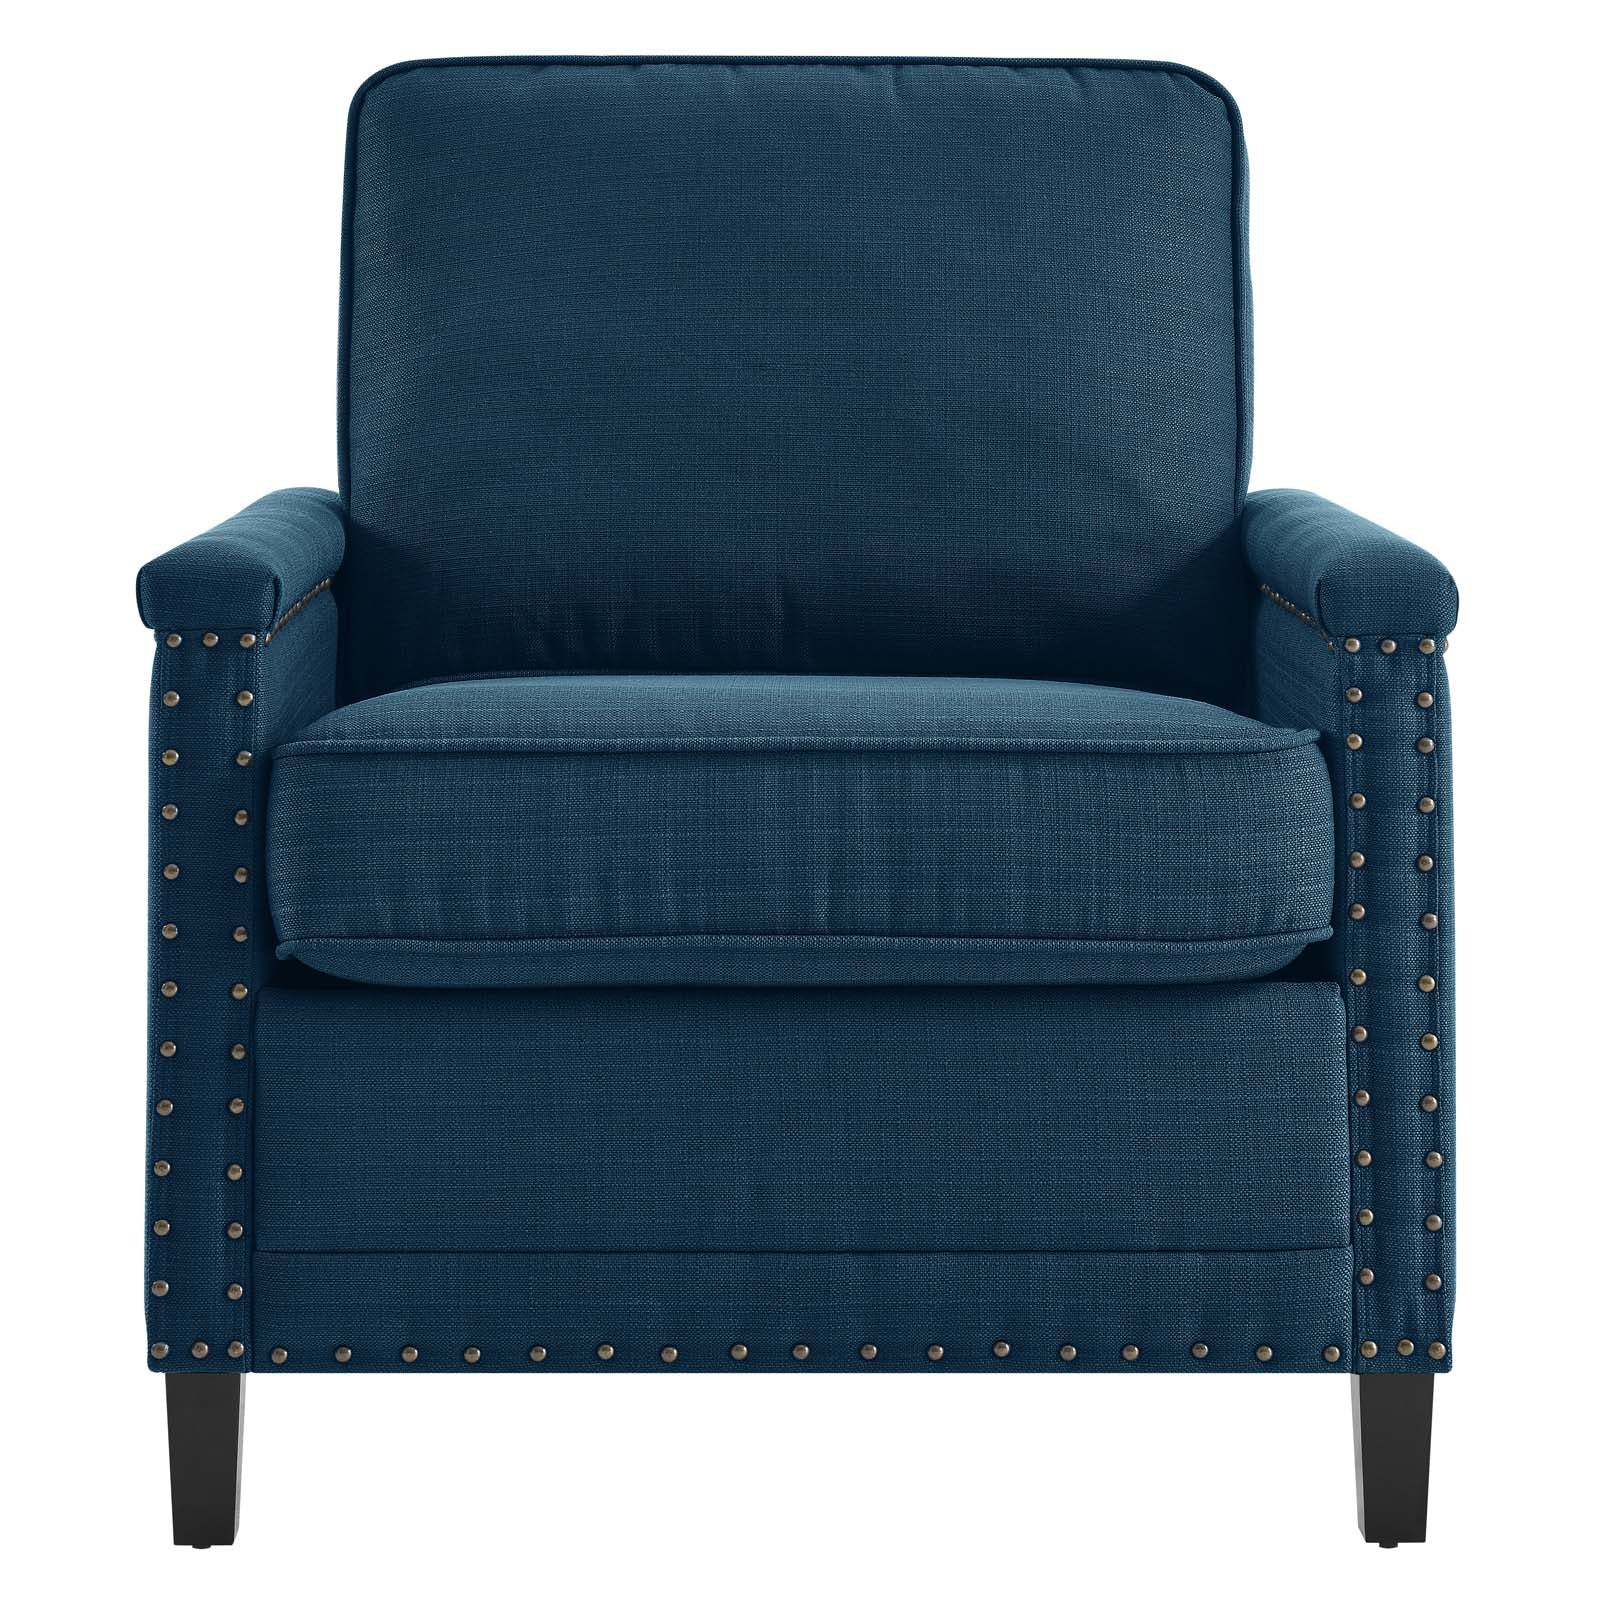 Modway Accent Chairs - Ashton Upholstered Fabric Armchair Azure